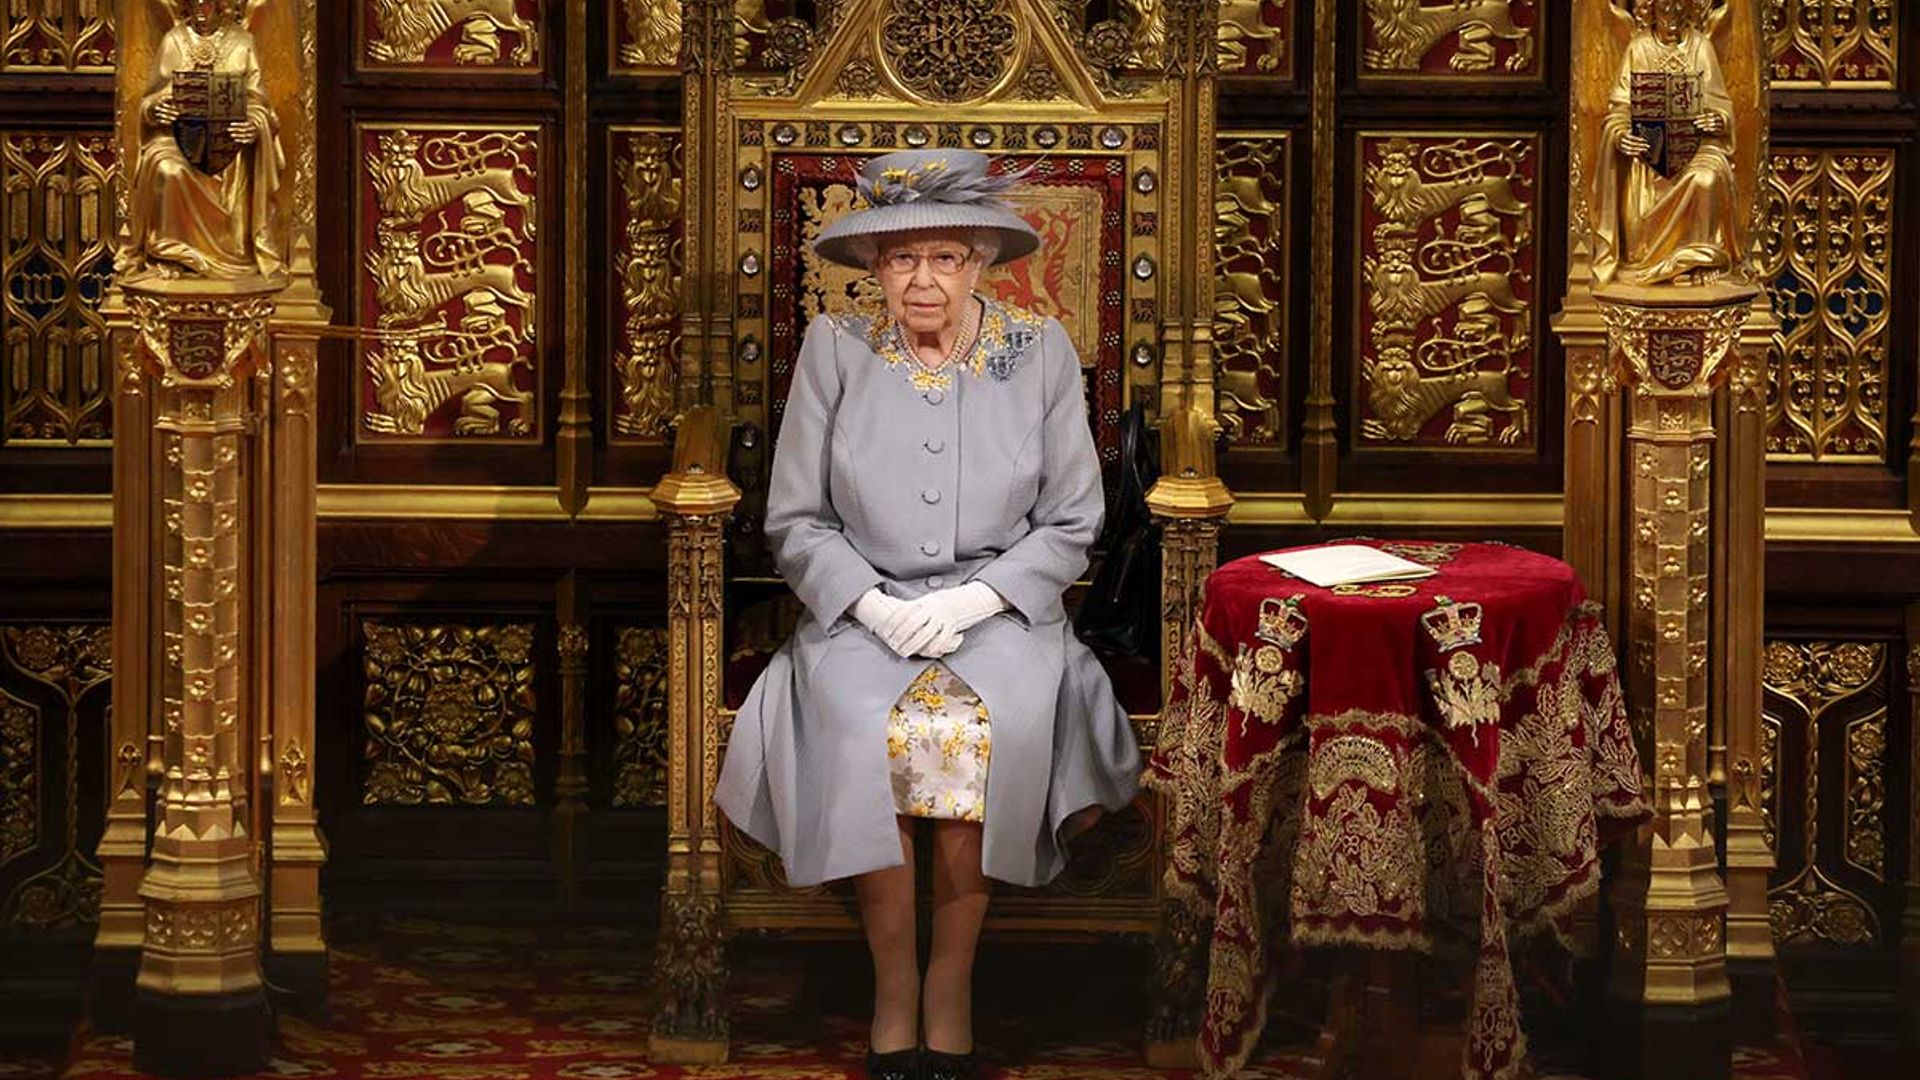 Real reason revealed for the Queen's lonely appearance at Parliament ...